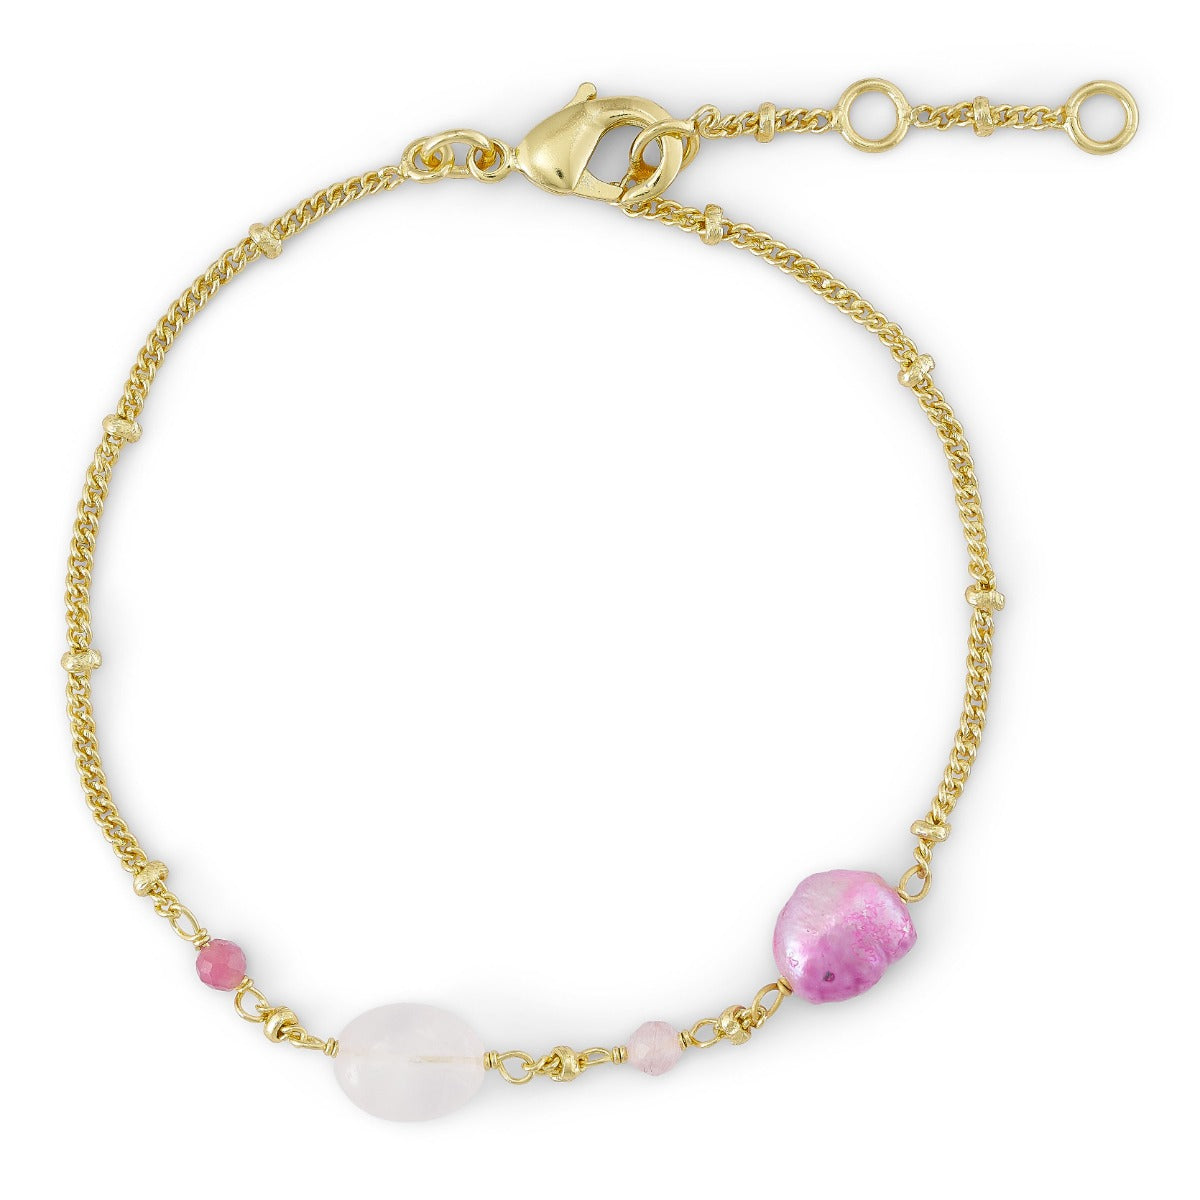 Pure by nat bracelet with purple pearls